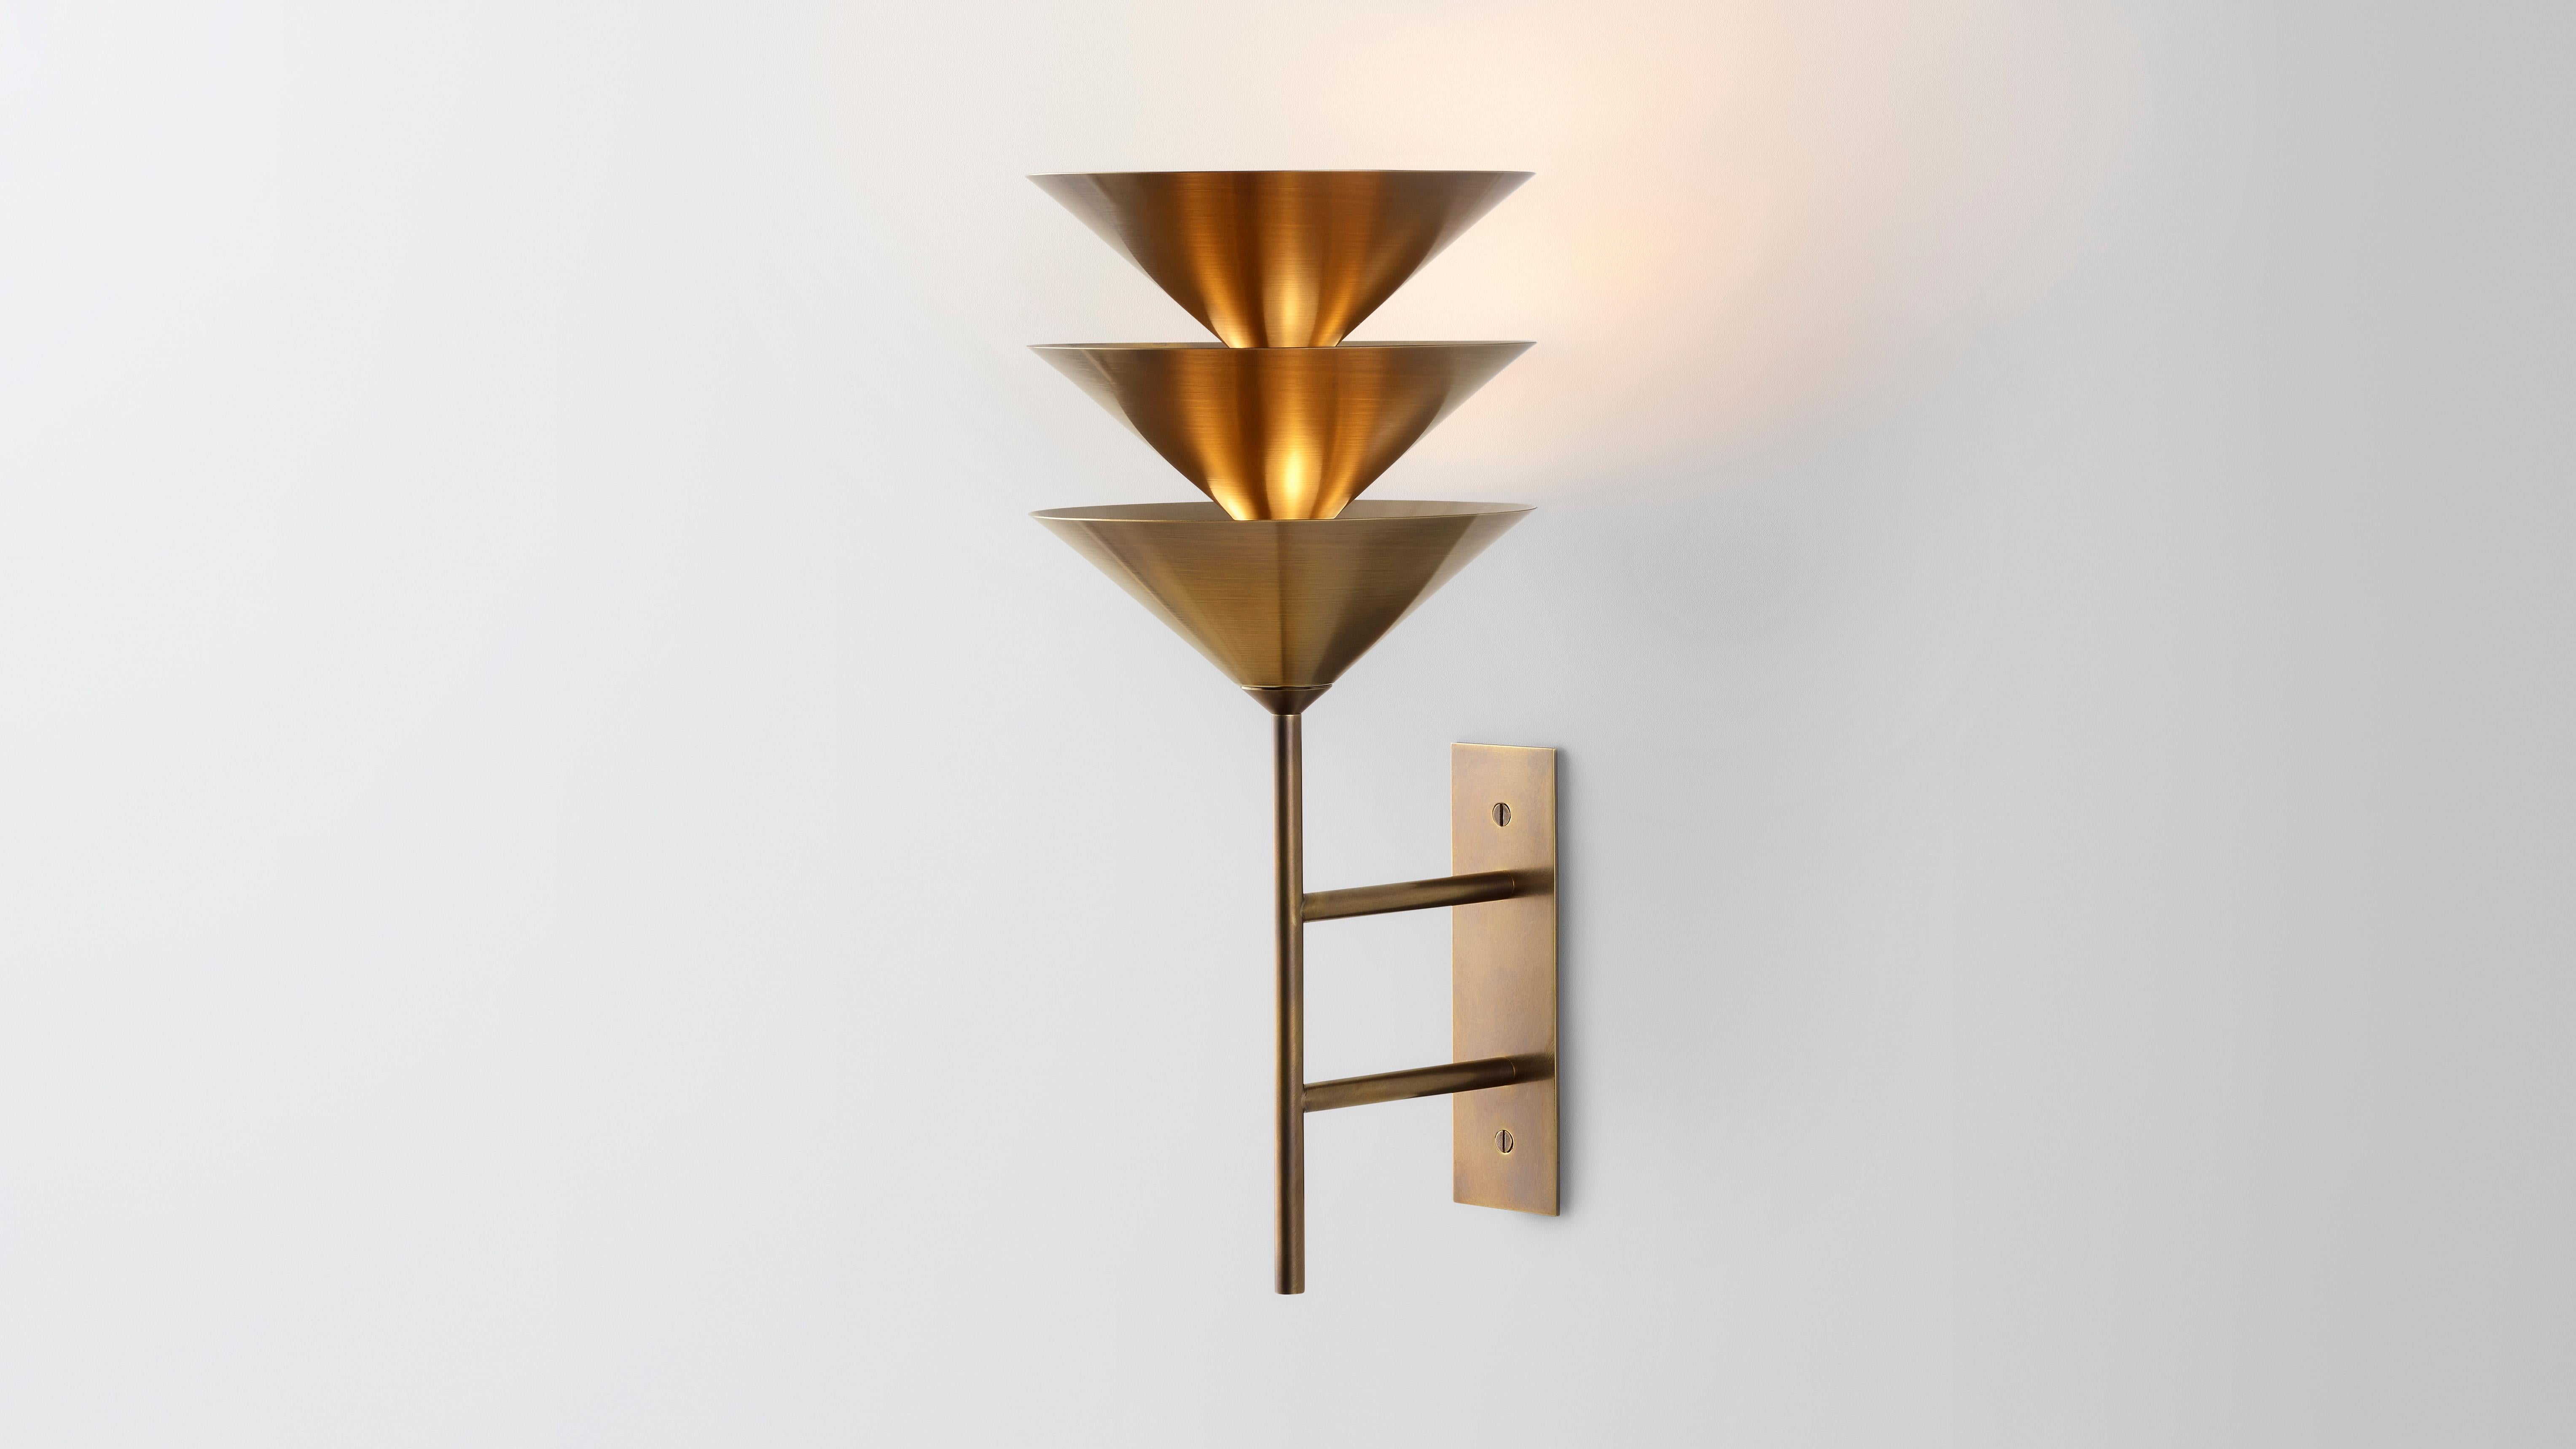 Wall stack 3 by Volker Haug
Pyramid Scheme series
Dimensions: W 21, D 24, H 46 cm
Support: 20 cm 
Material: Brass
Finishes: Polished, brushed or bronzed brass; enamel or chrome-plated.
Custom finishes available on request.

Lamp: 12V G4 LED x